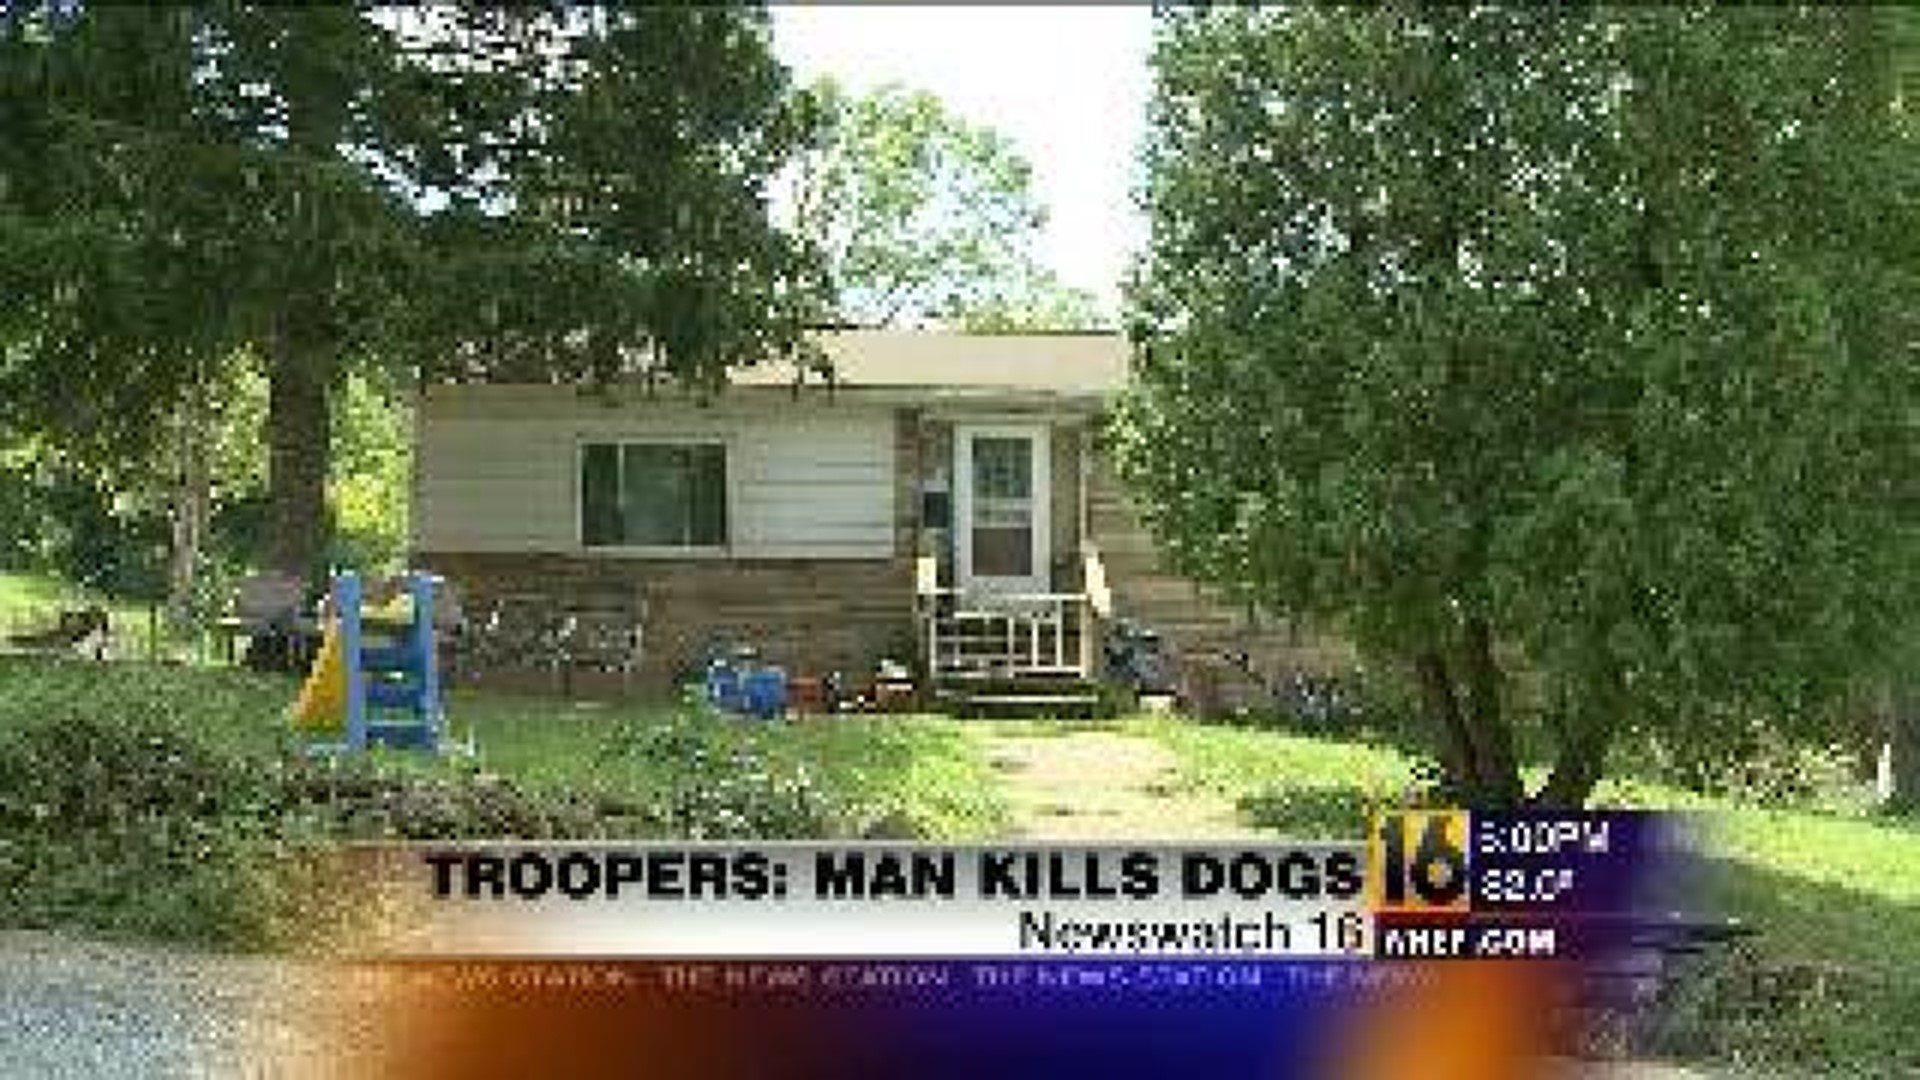 Man Kills Dog After 'Heated Arguement' With Wife